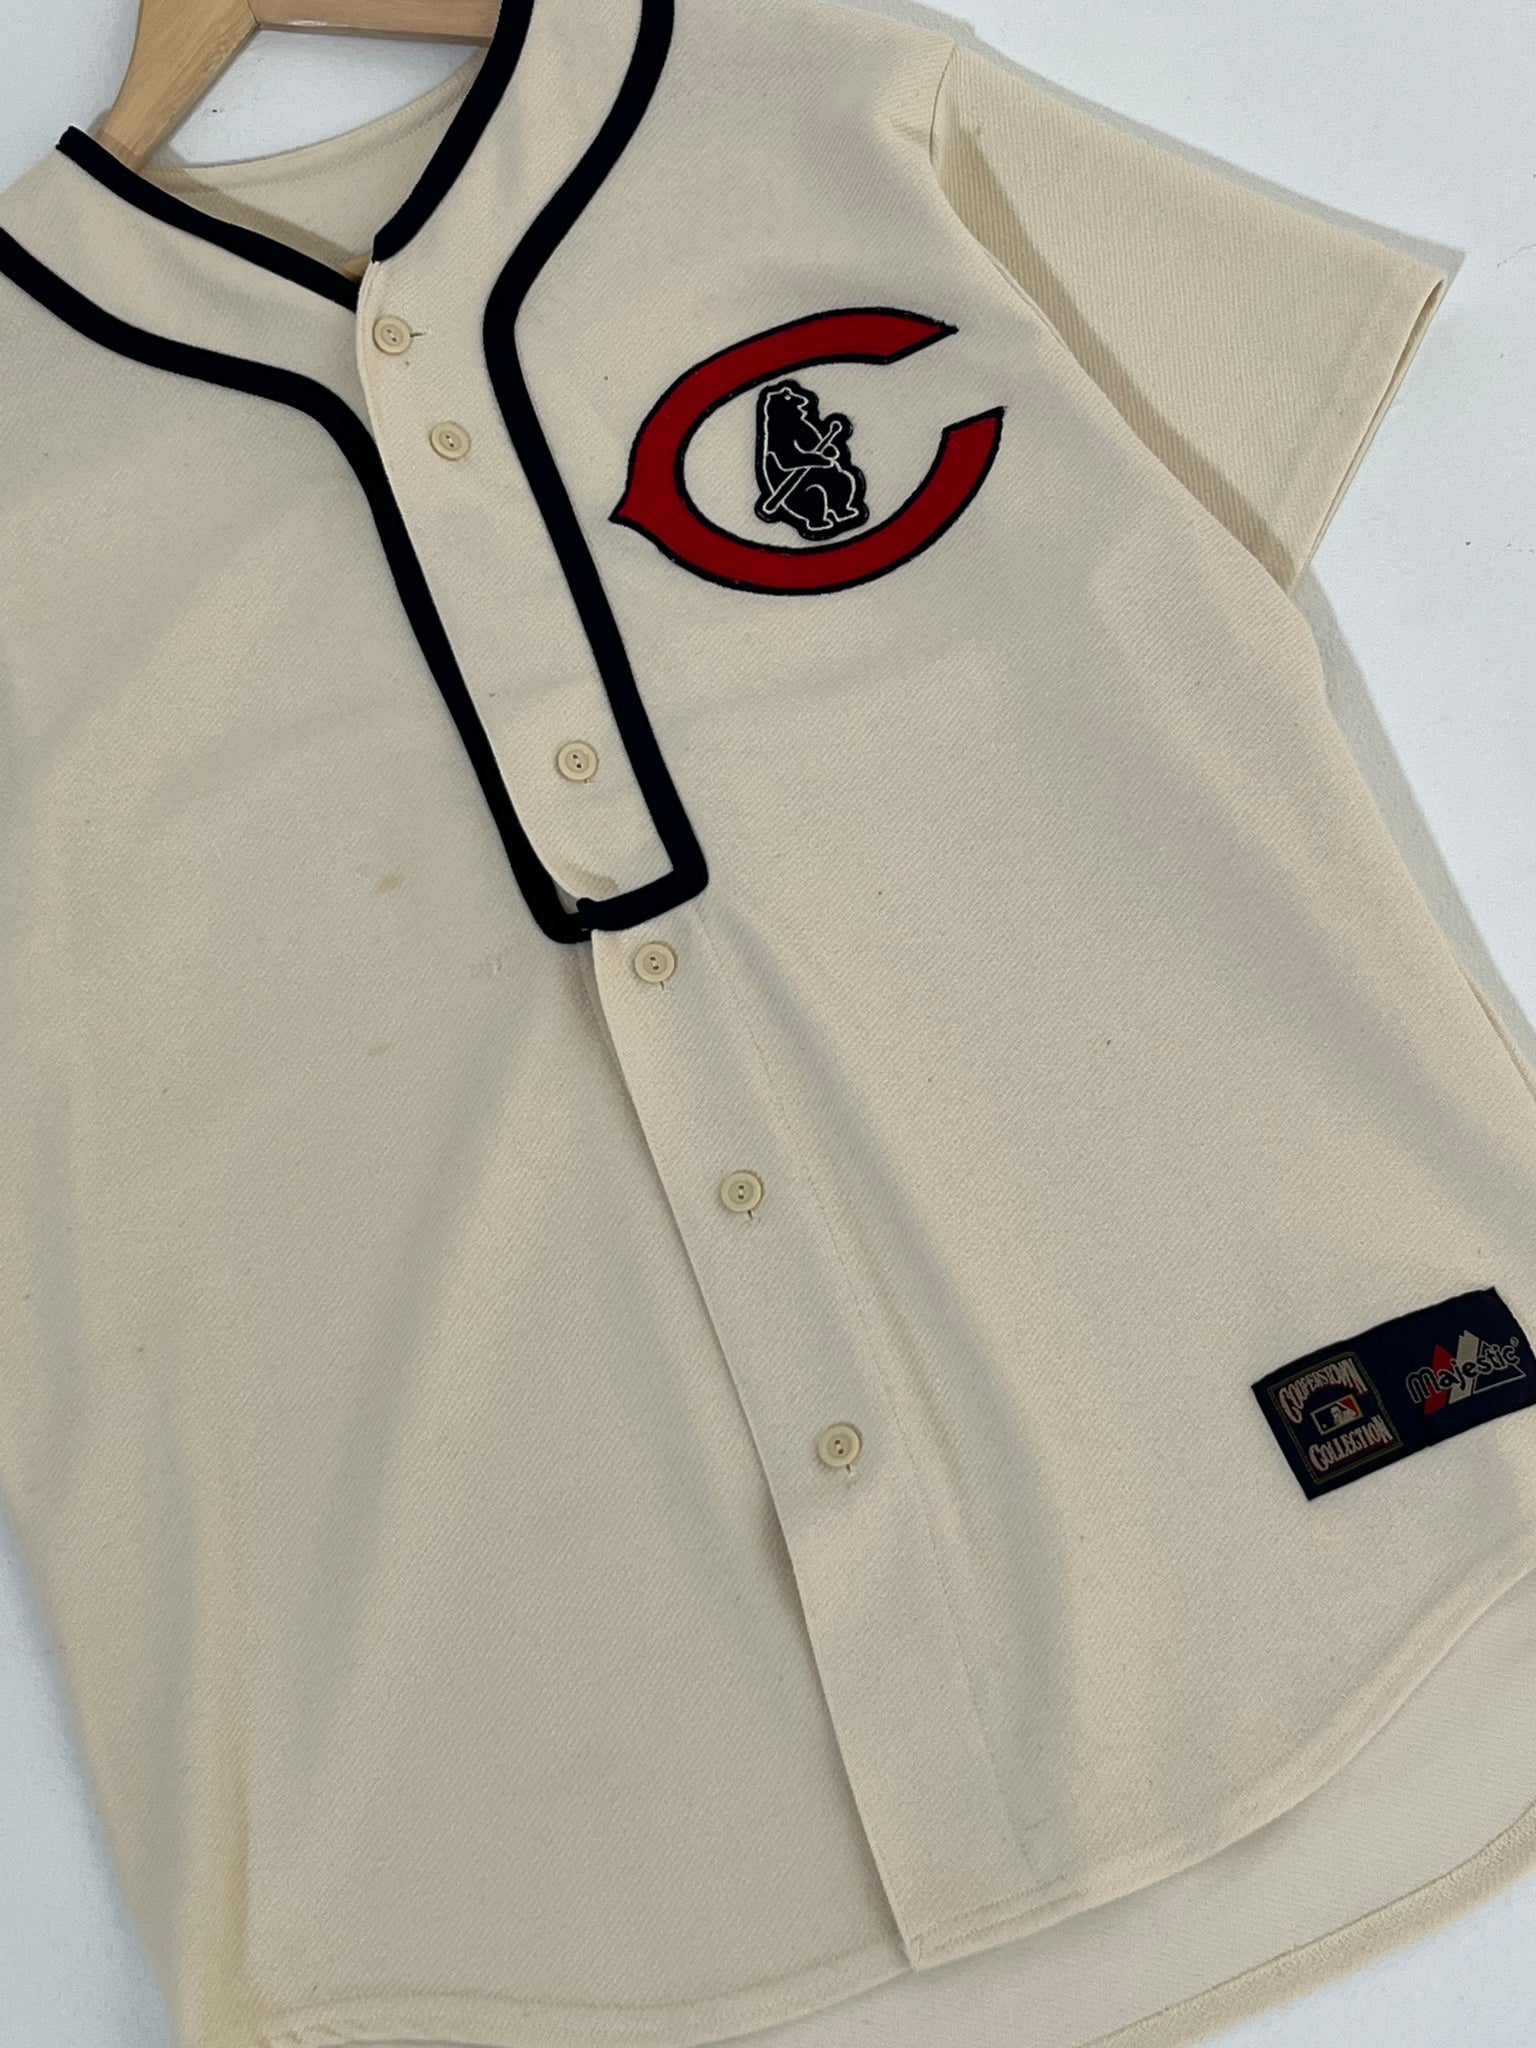 retro chicago cubs jersey